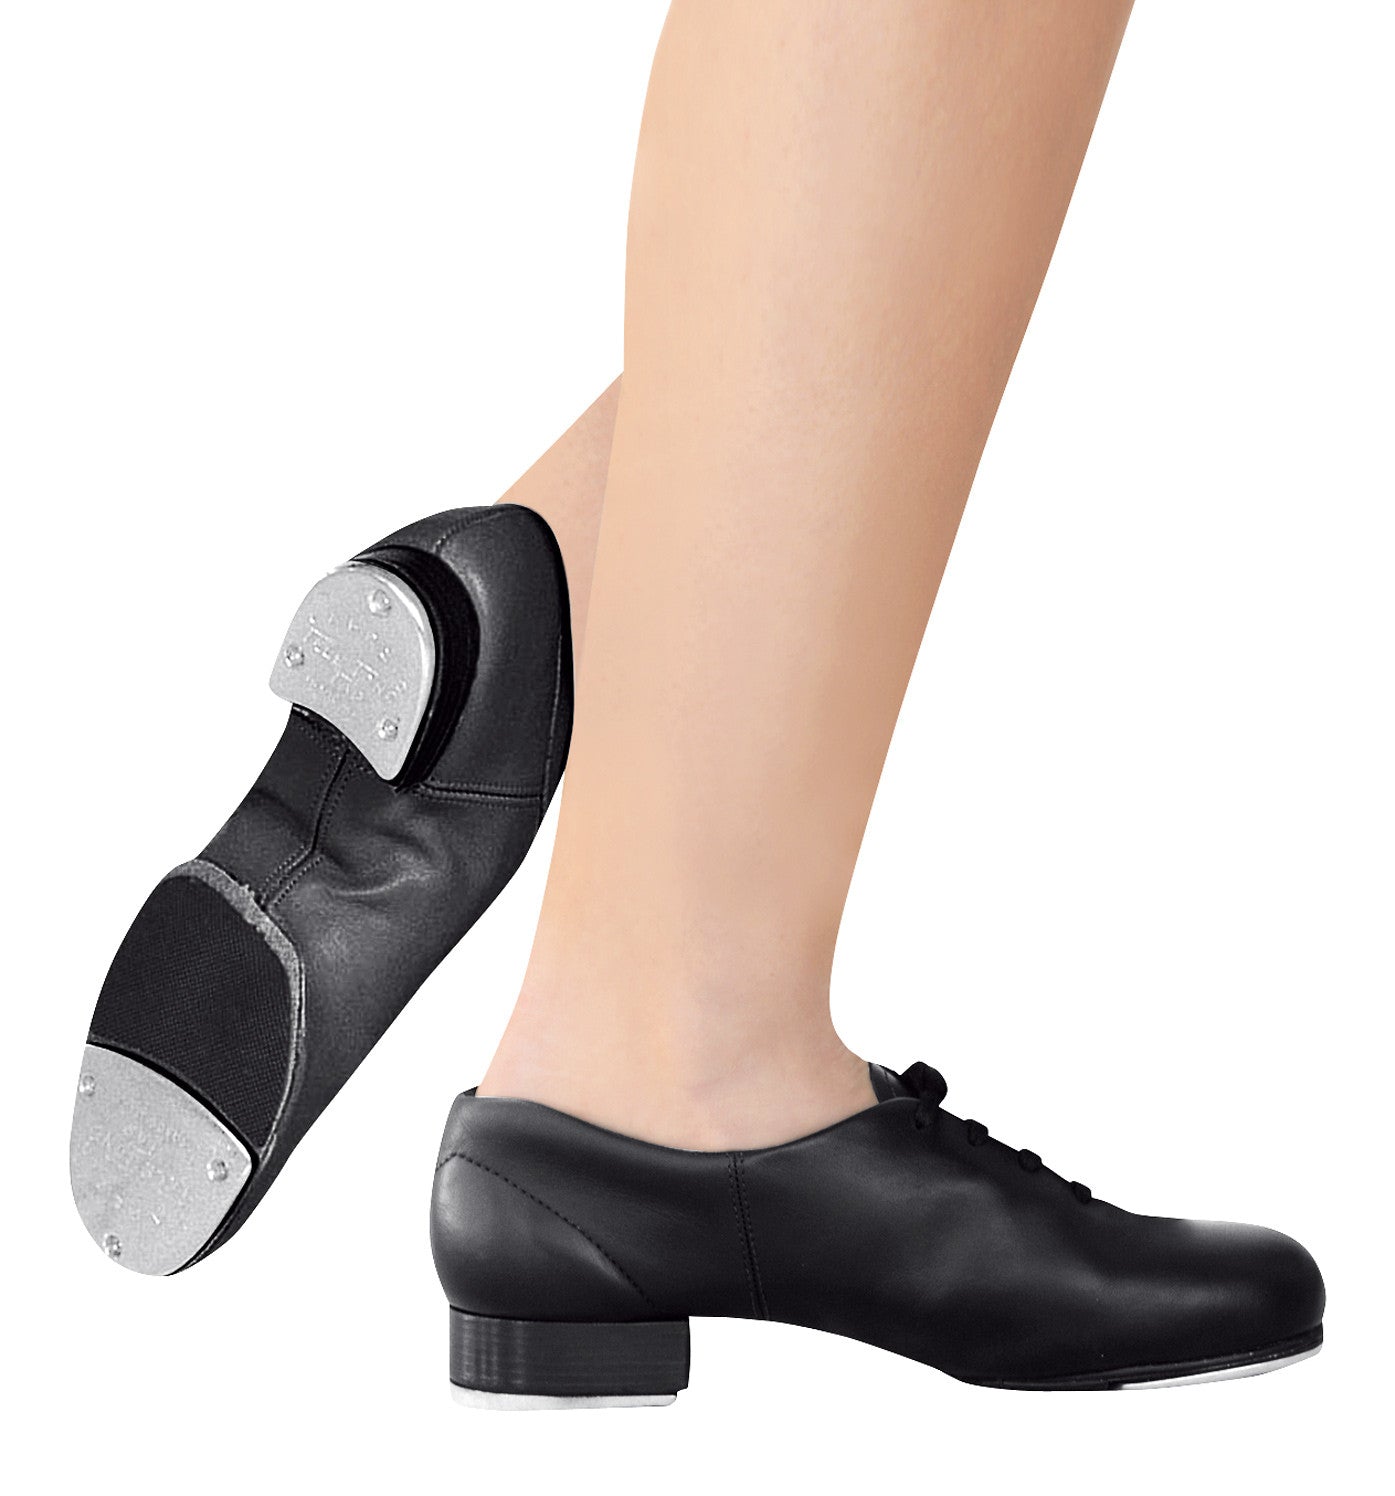 Adult "FlexMaster" Split-Sole Lace Up Tap Shoes for Women